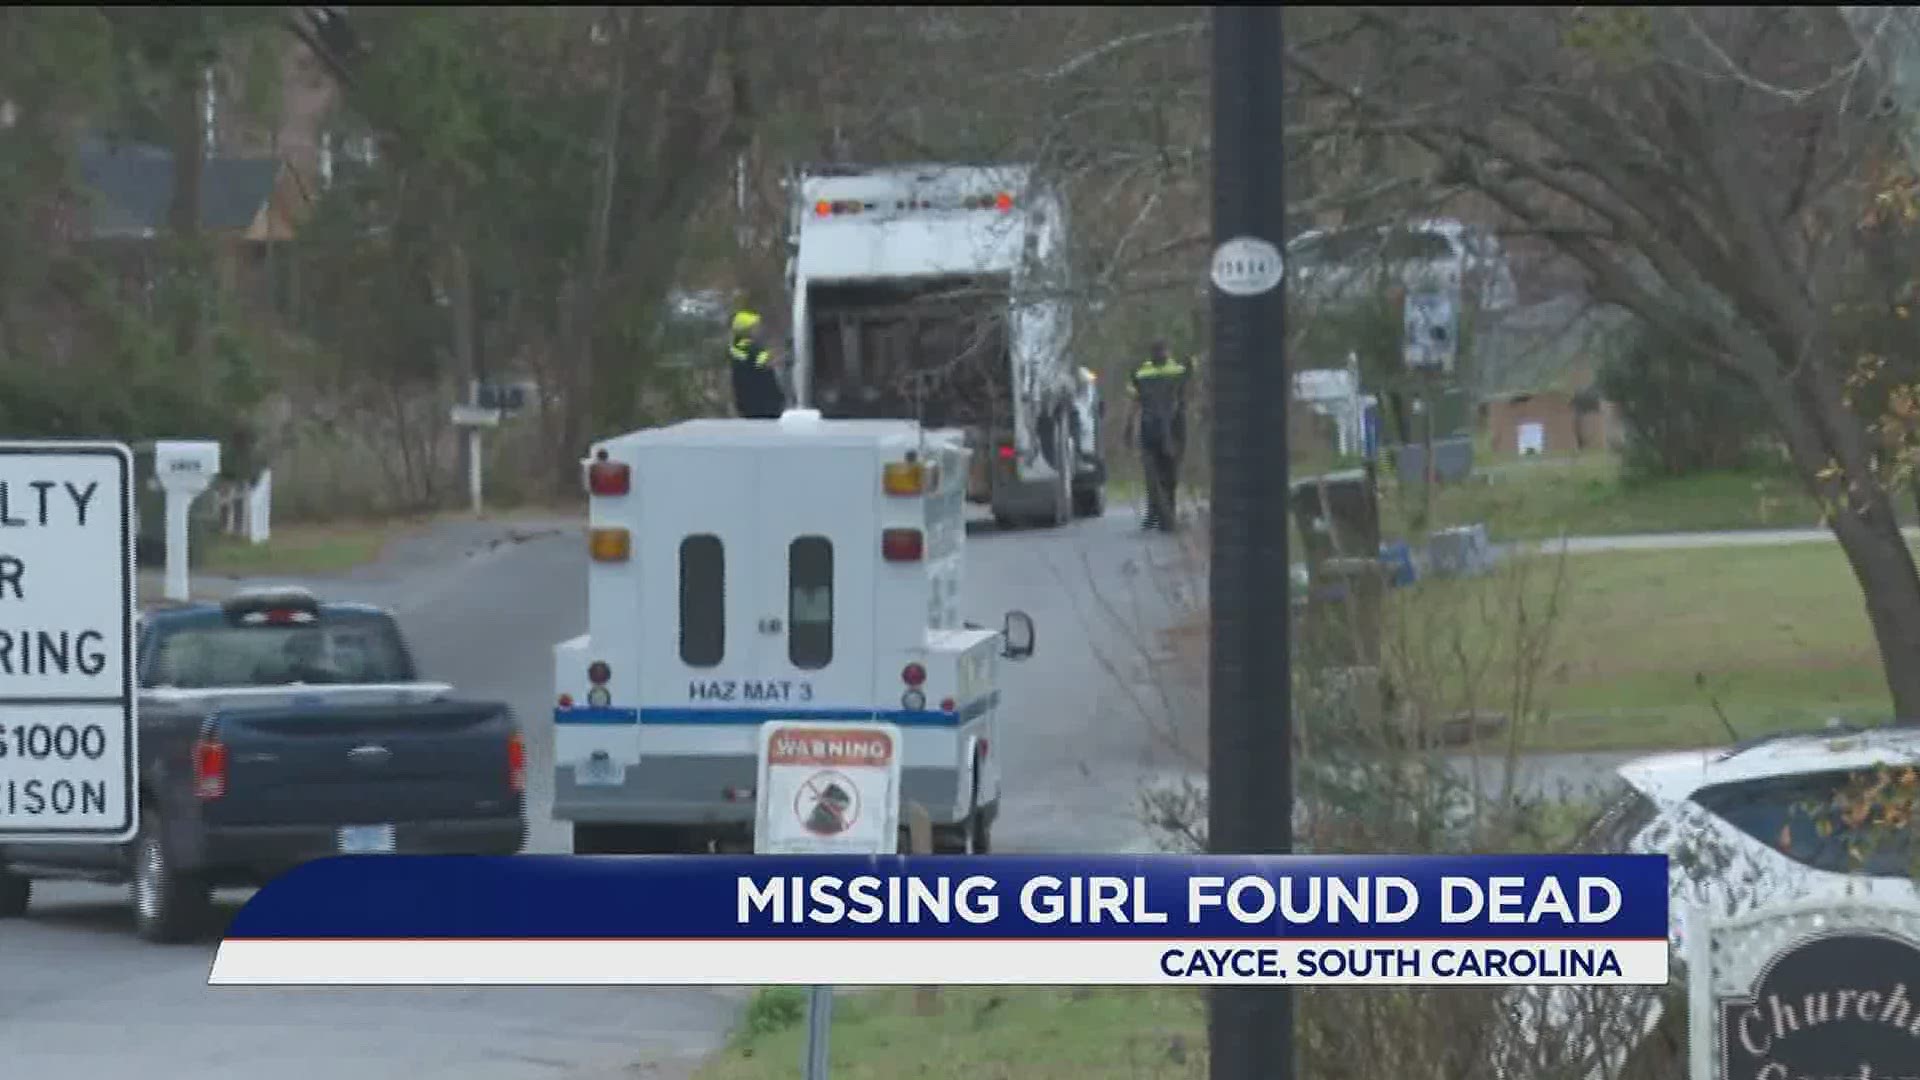 Faye Swetlik was reported missing this week after coming home from school in Cayce, South Carolina.